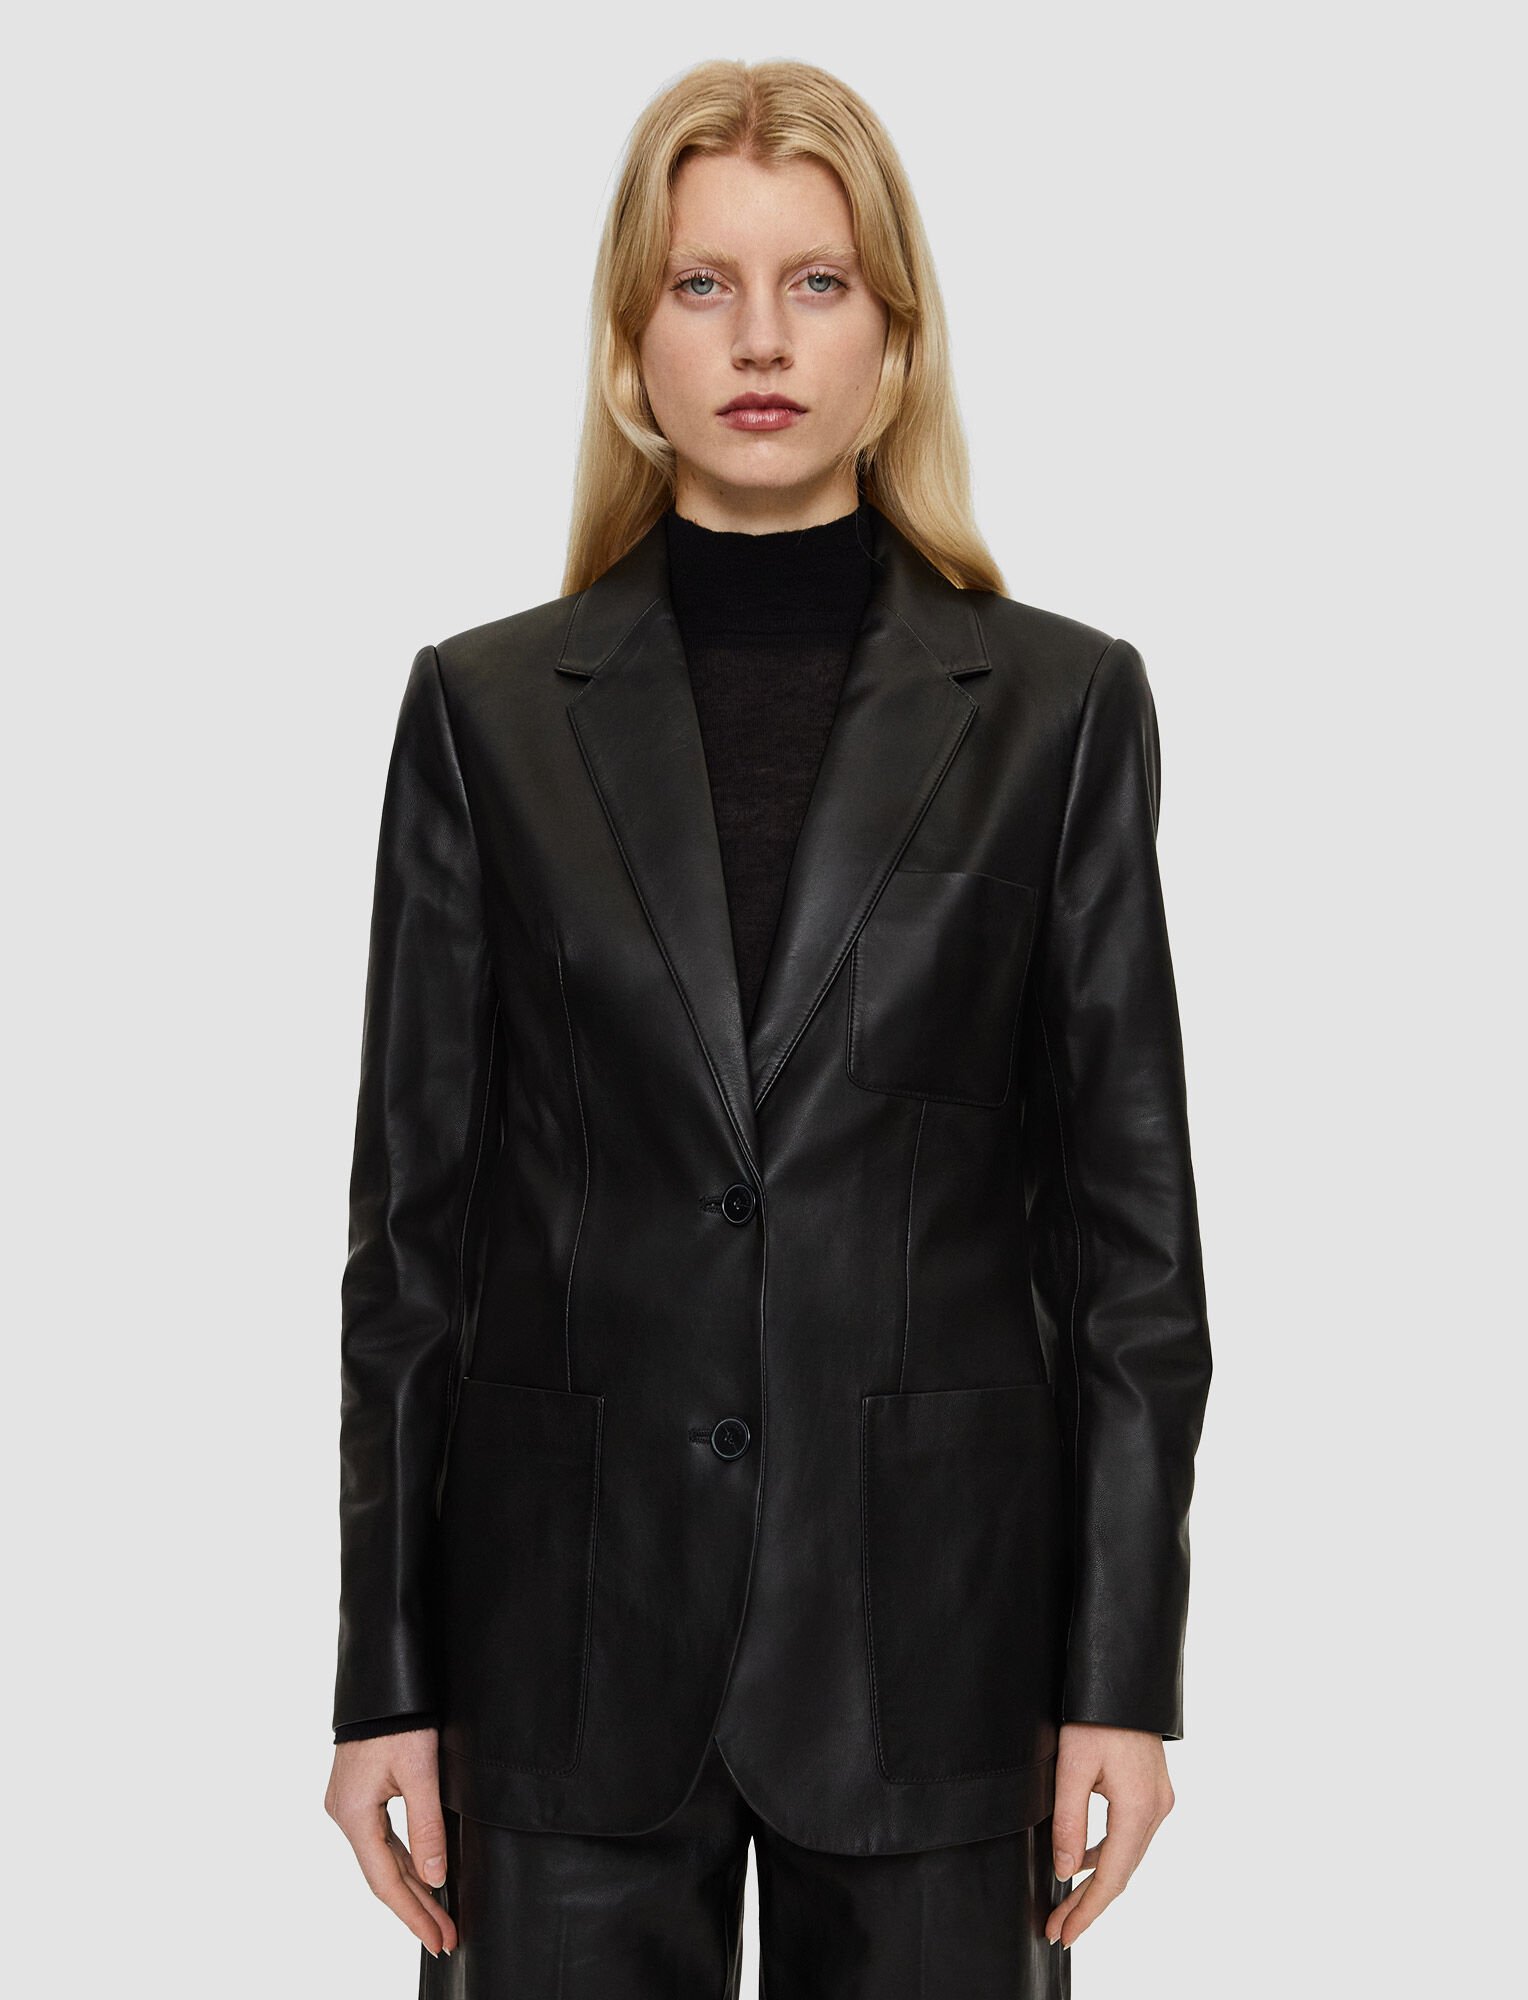 Joseph, Nappa Leather Jacques Jacket, in Black